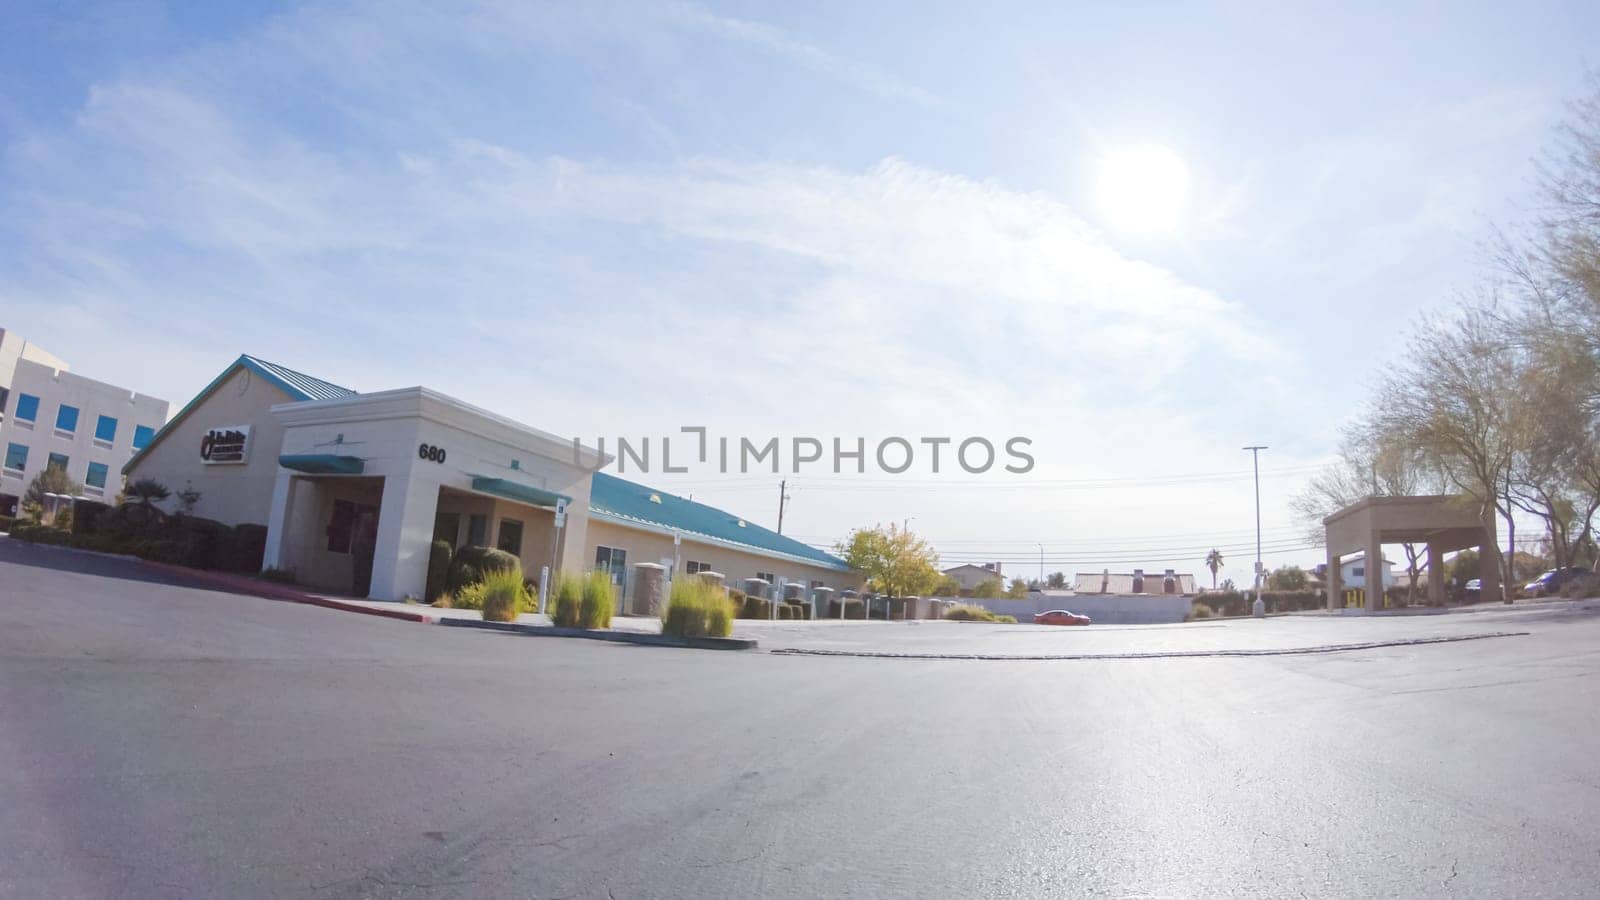 Driving through a bustling Las Vegas residential neighborhood during the day reveals the vibrant energy and unique architectural styles that make the city's communities so captivating.